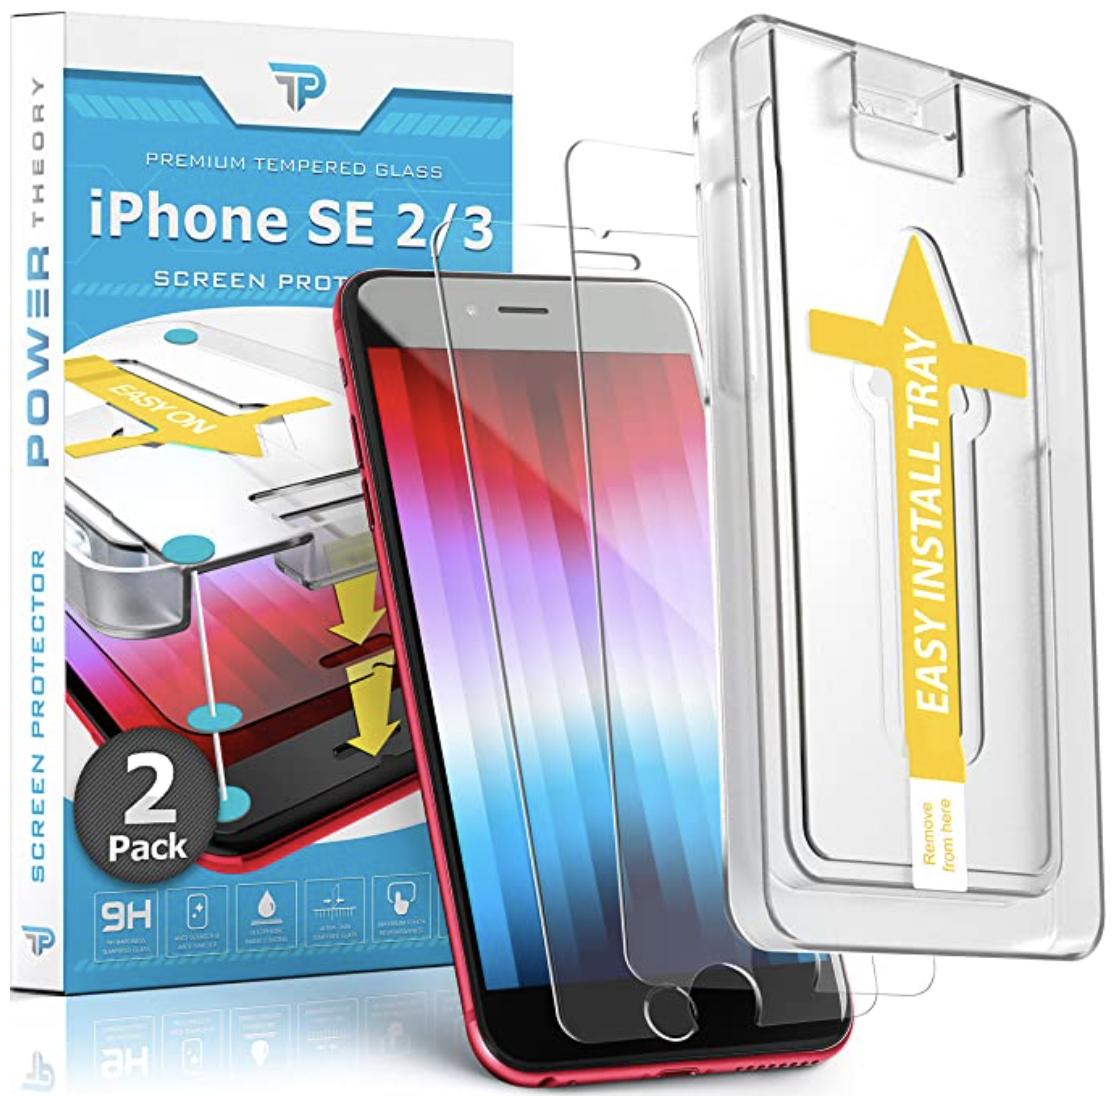 Power Theory Iphone Se 2 3 Screen Protector Render Cropped